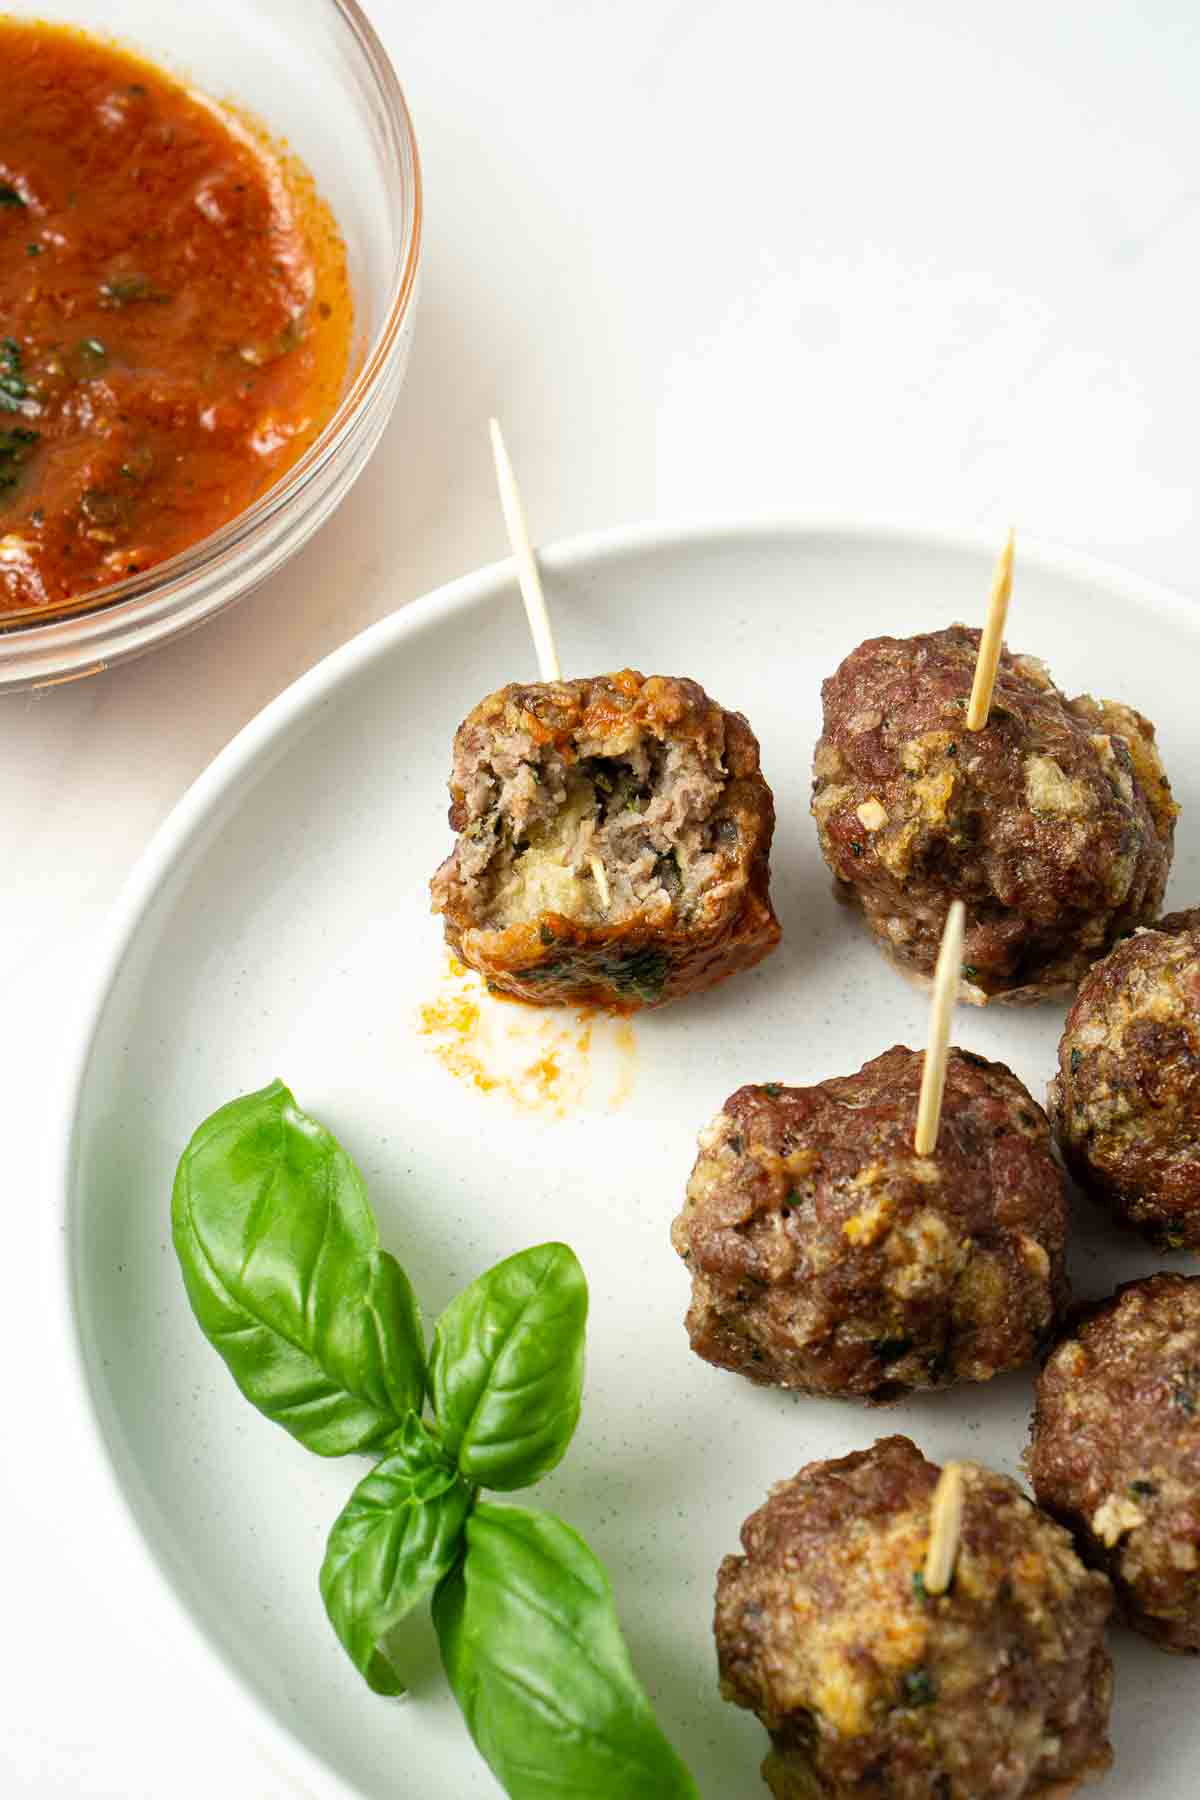 Meatballs on a plate with one that has a bite taken